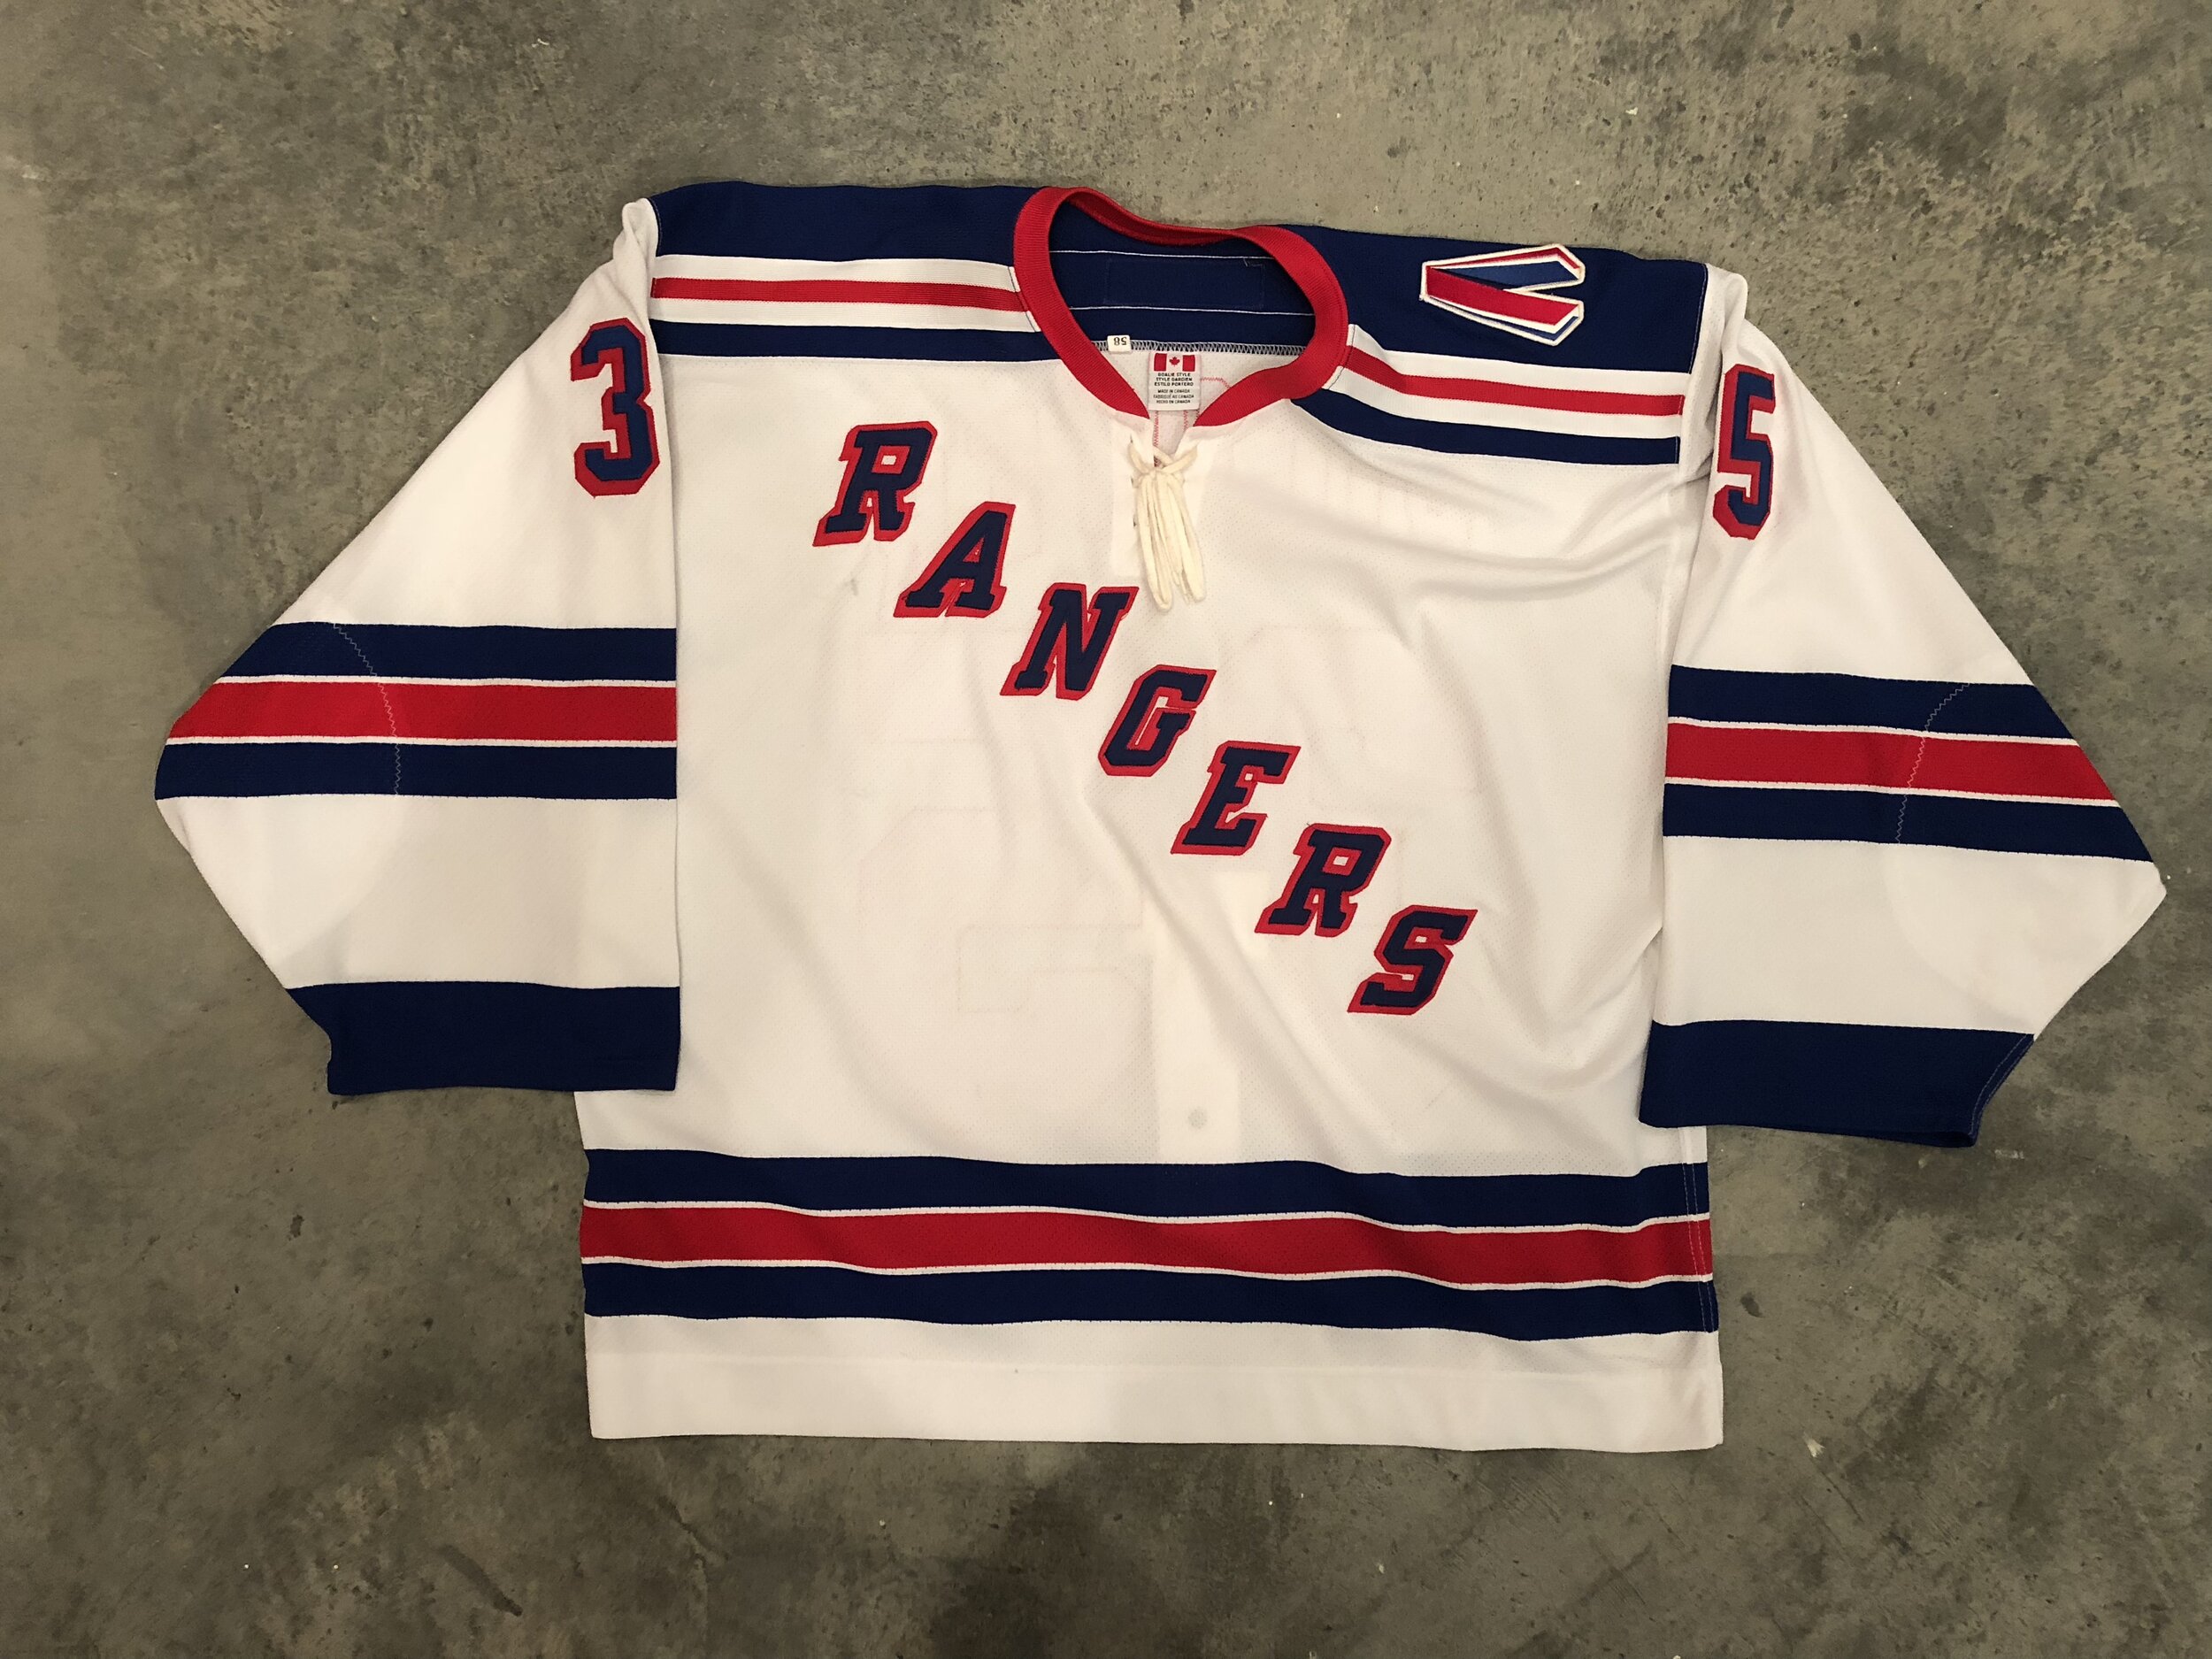 Get your hands on a game-worn jersey: Saturday, October 14